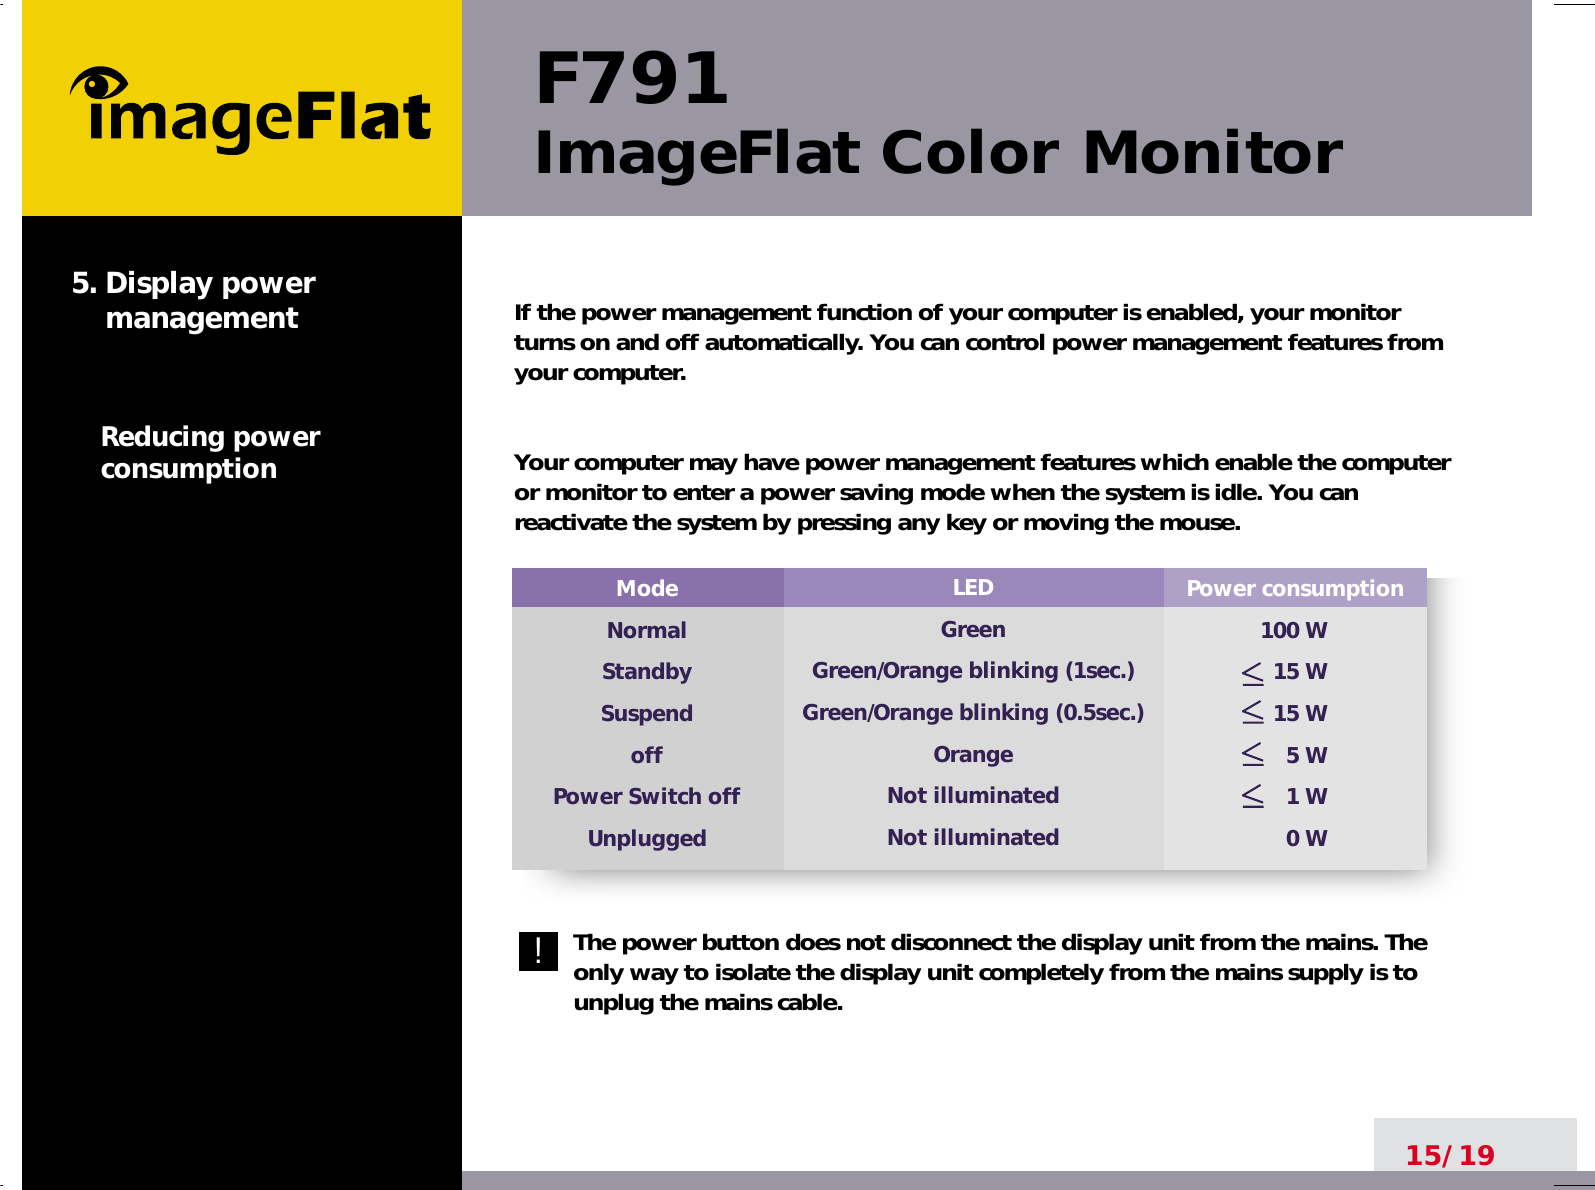 F791ImageFlat Color Monitor15/19If the power management function of your computer is enabled, your monitorturns on and off automatically. You can control power management features fromyour computer.Your computer may have power management features which enable the computeror monitor to enter a power saving mode when the system is idle. You canreactivate the system by pressing any key or moving the mouse.The power button does not disconnect the display unit from the mains. Theonly way to isolate the display unit completely from the mains supply is tounplug the mains cable.5. Display powermanagementReducing powerconsumption!Power consumption100 W15 W15 W5 W1 W0 WModeNormalStandbySuspendoff    Power Switch offUnpluggedLEDGreenGreen/Orange blinking (1sec.)Green/Orange blinking (0.5sec.)OrangeNot illuminatedNot illuminated